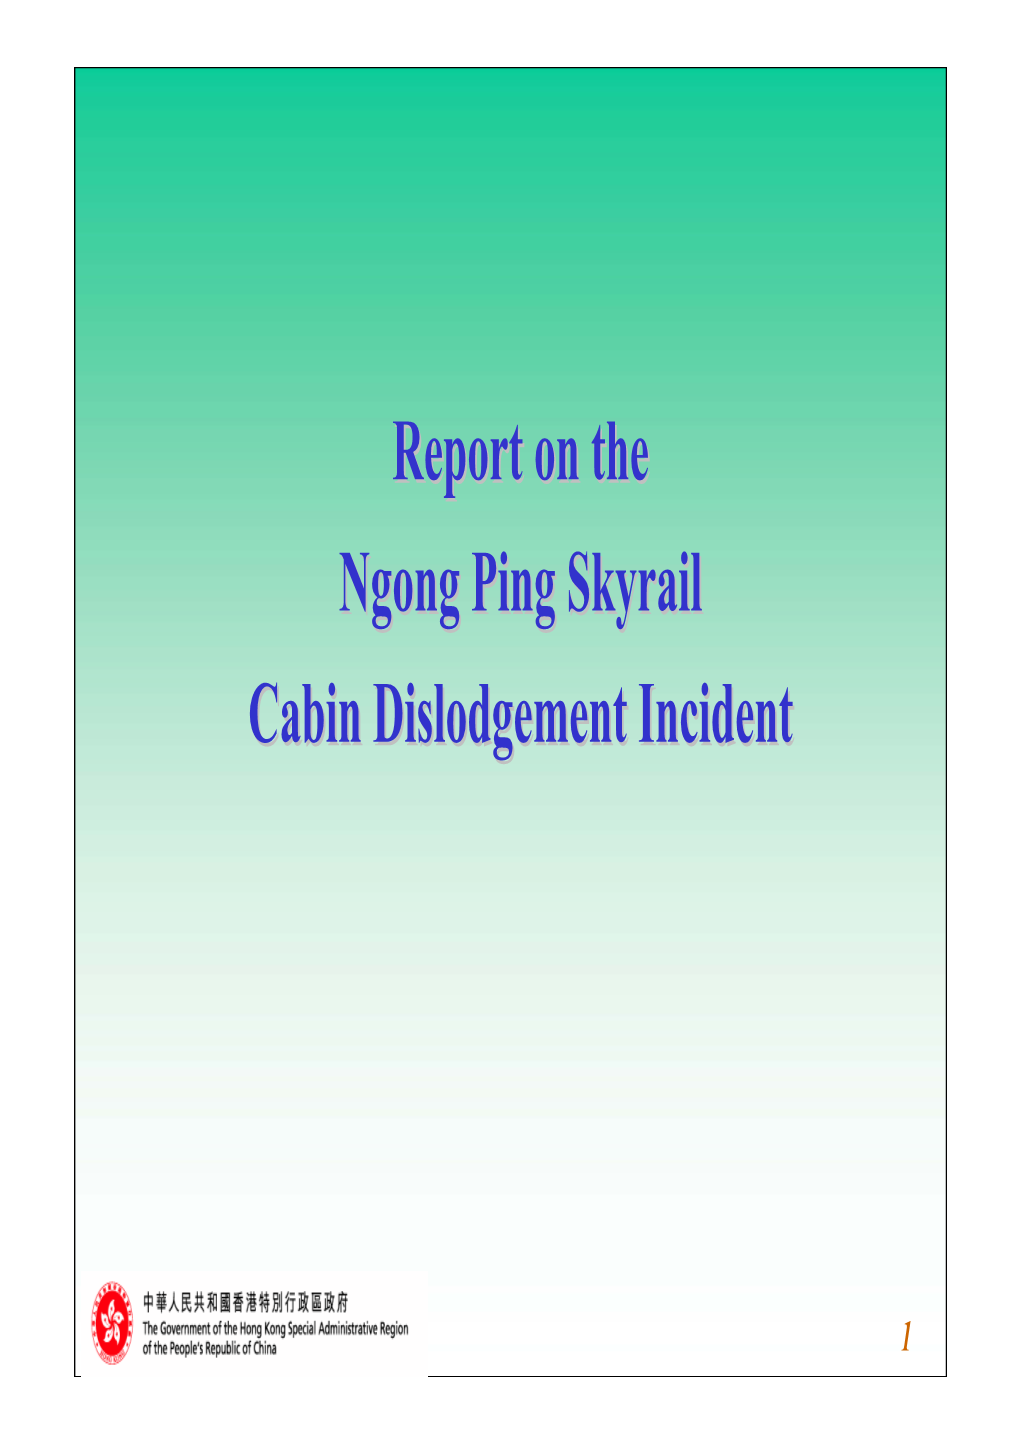 Report on the Ngong Ping Skyrail Cabin Dislodgement Incident